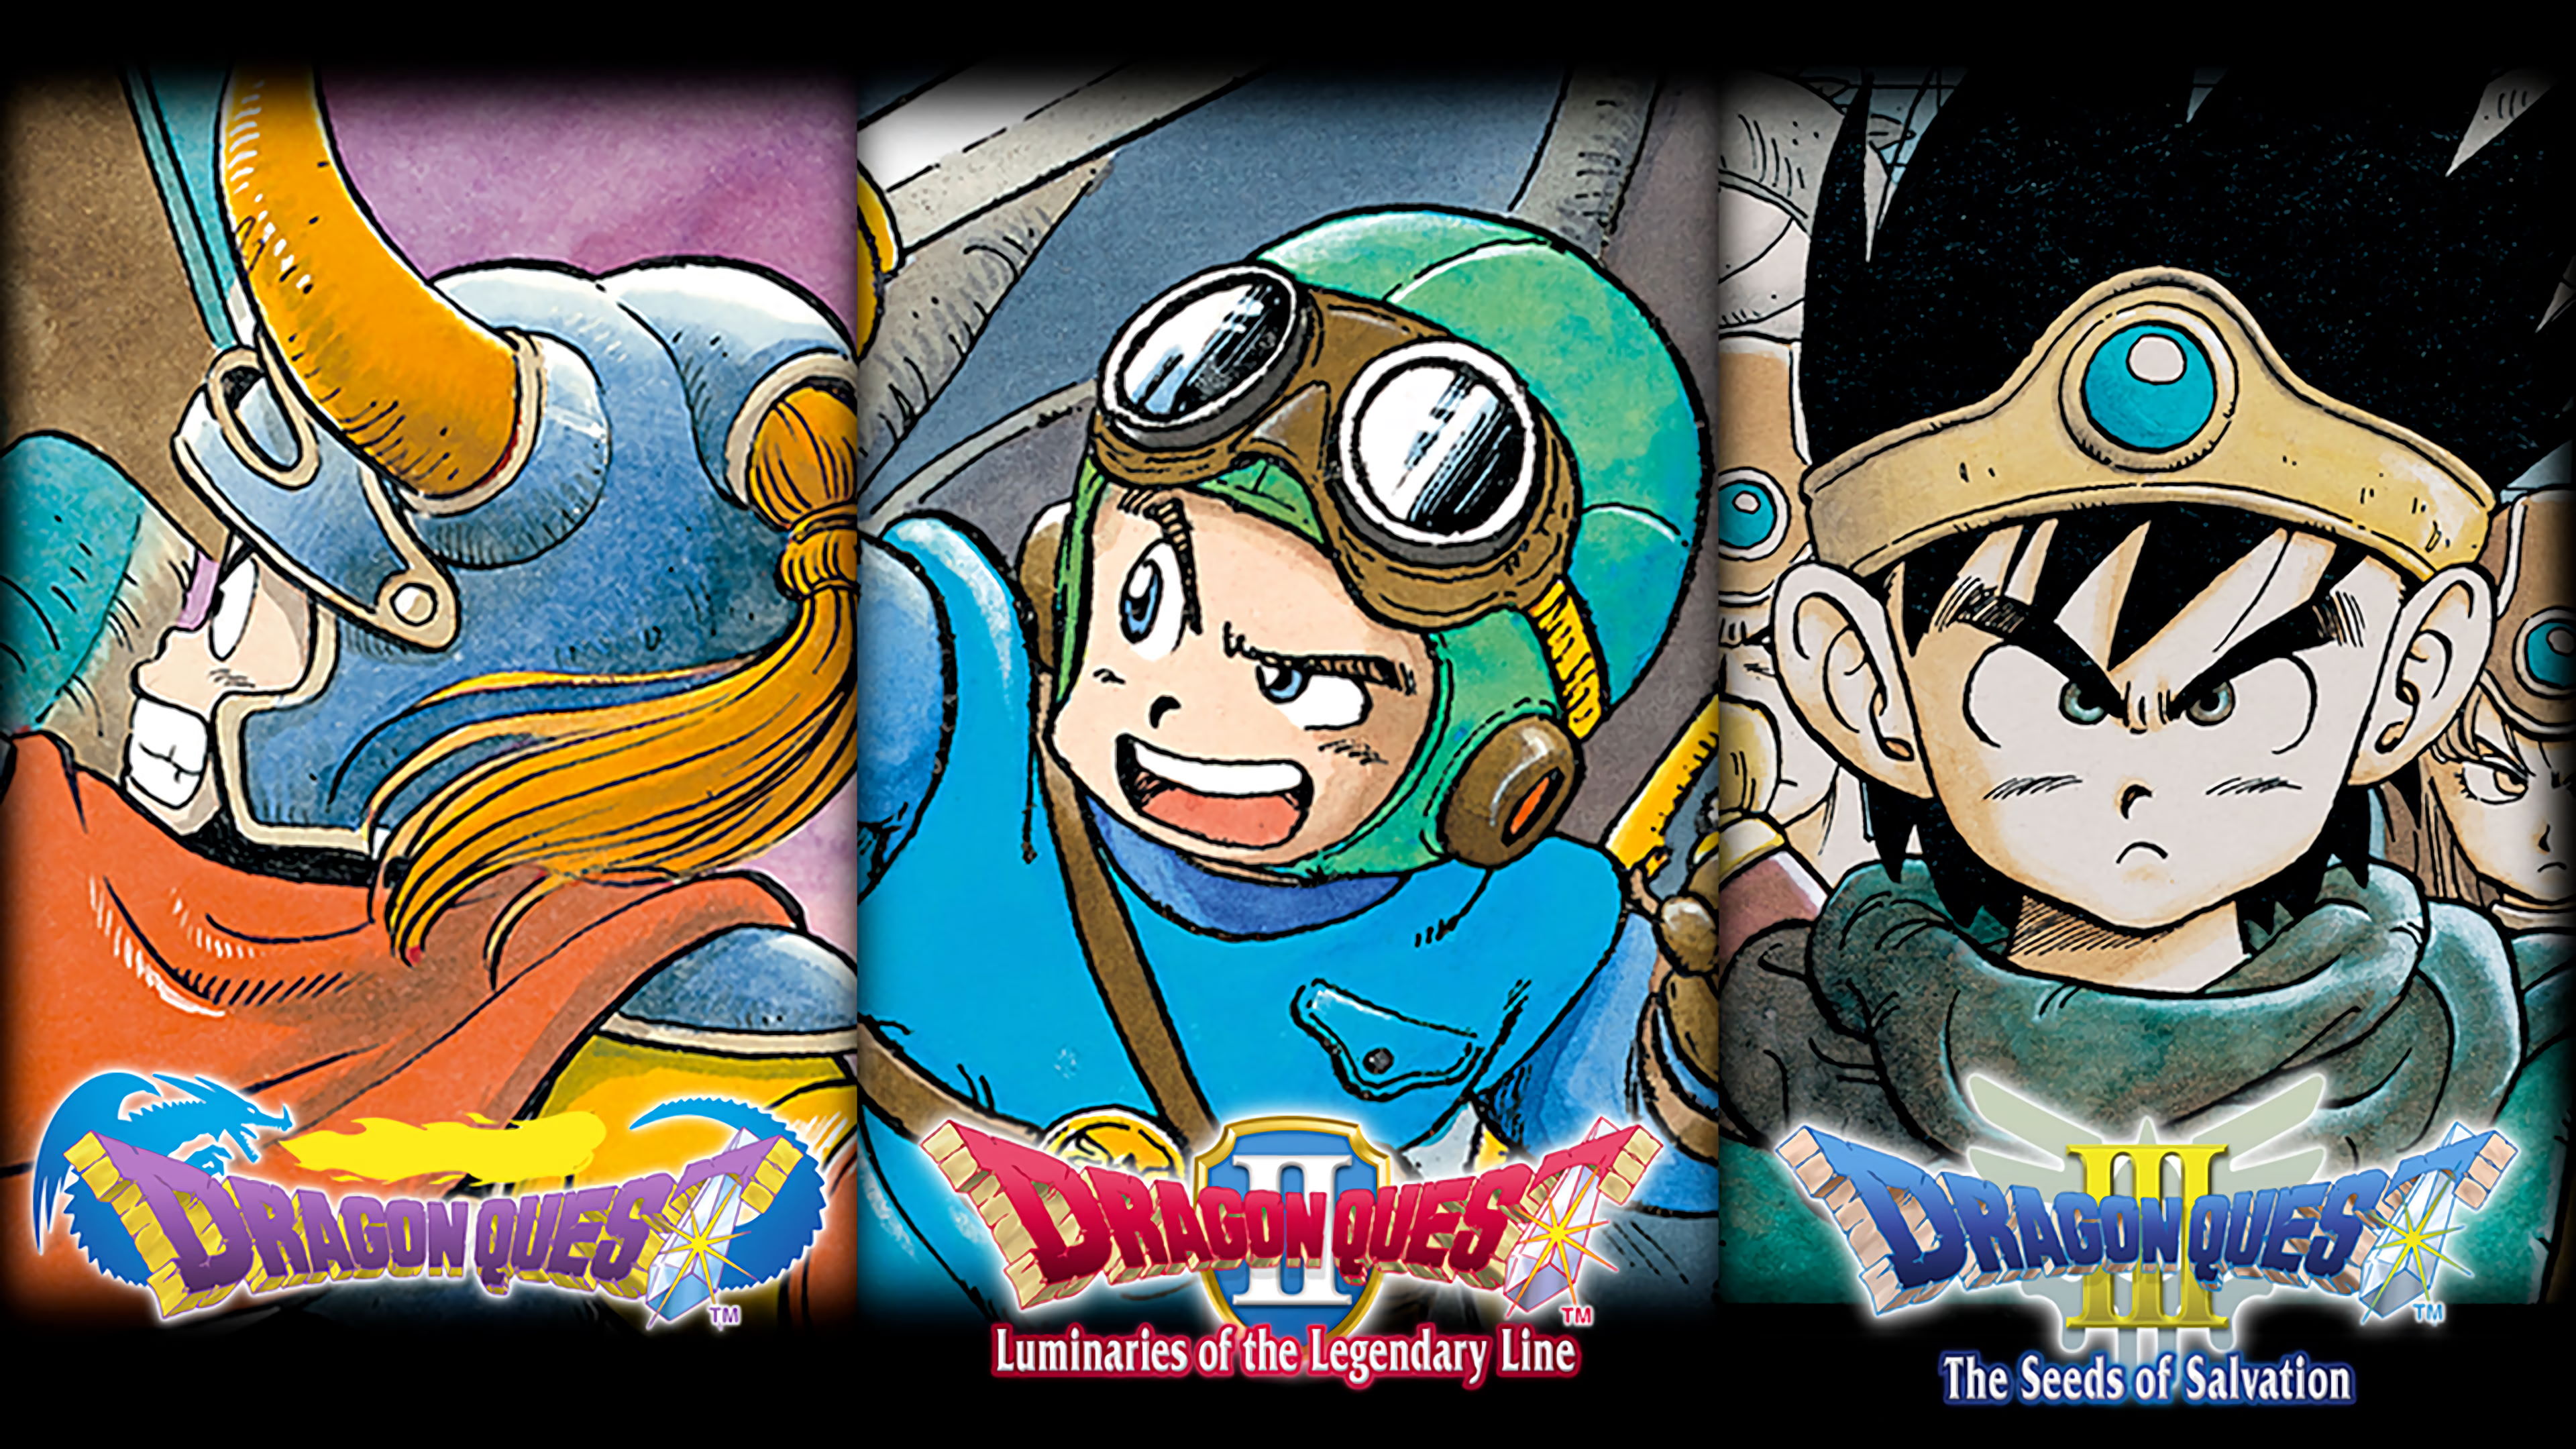 Dragon Quest / Dragon Quest II: Luminaries of the Legendary Line / Dragon Quest III: The Seeds of Salvation